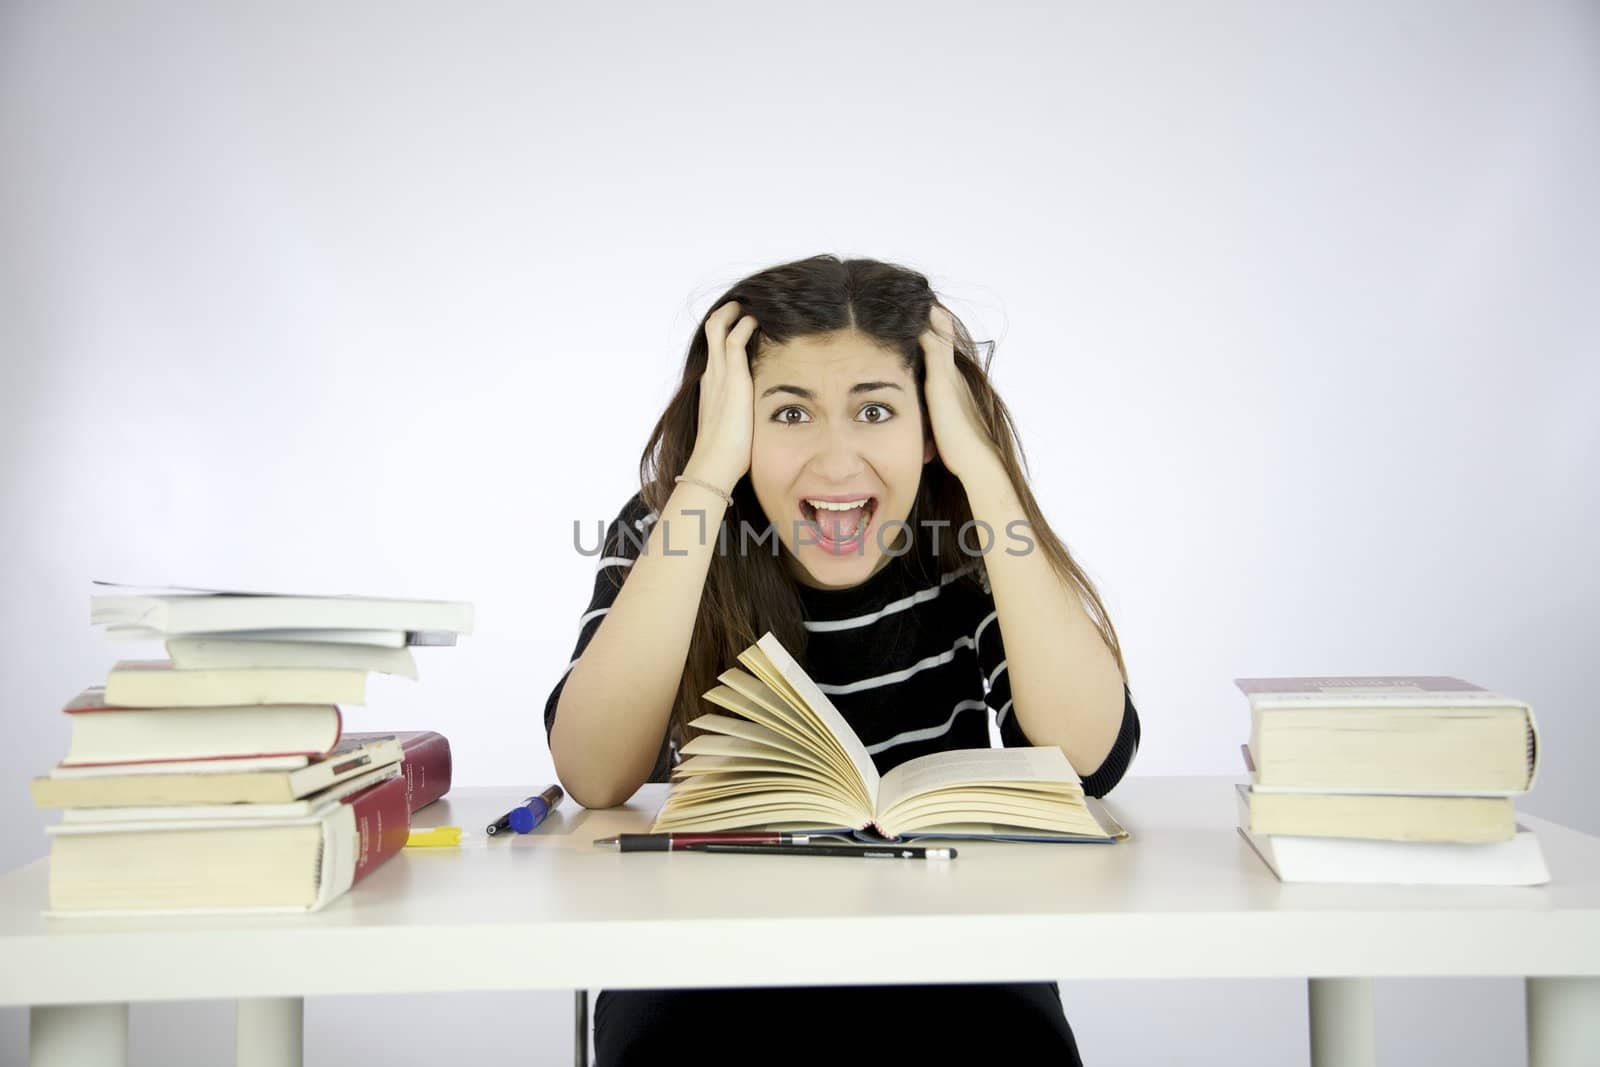 Girl studying book on a desk shouting